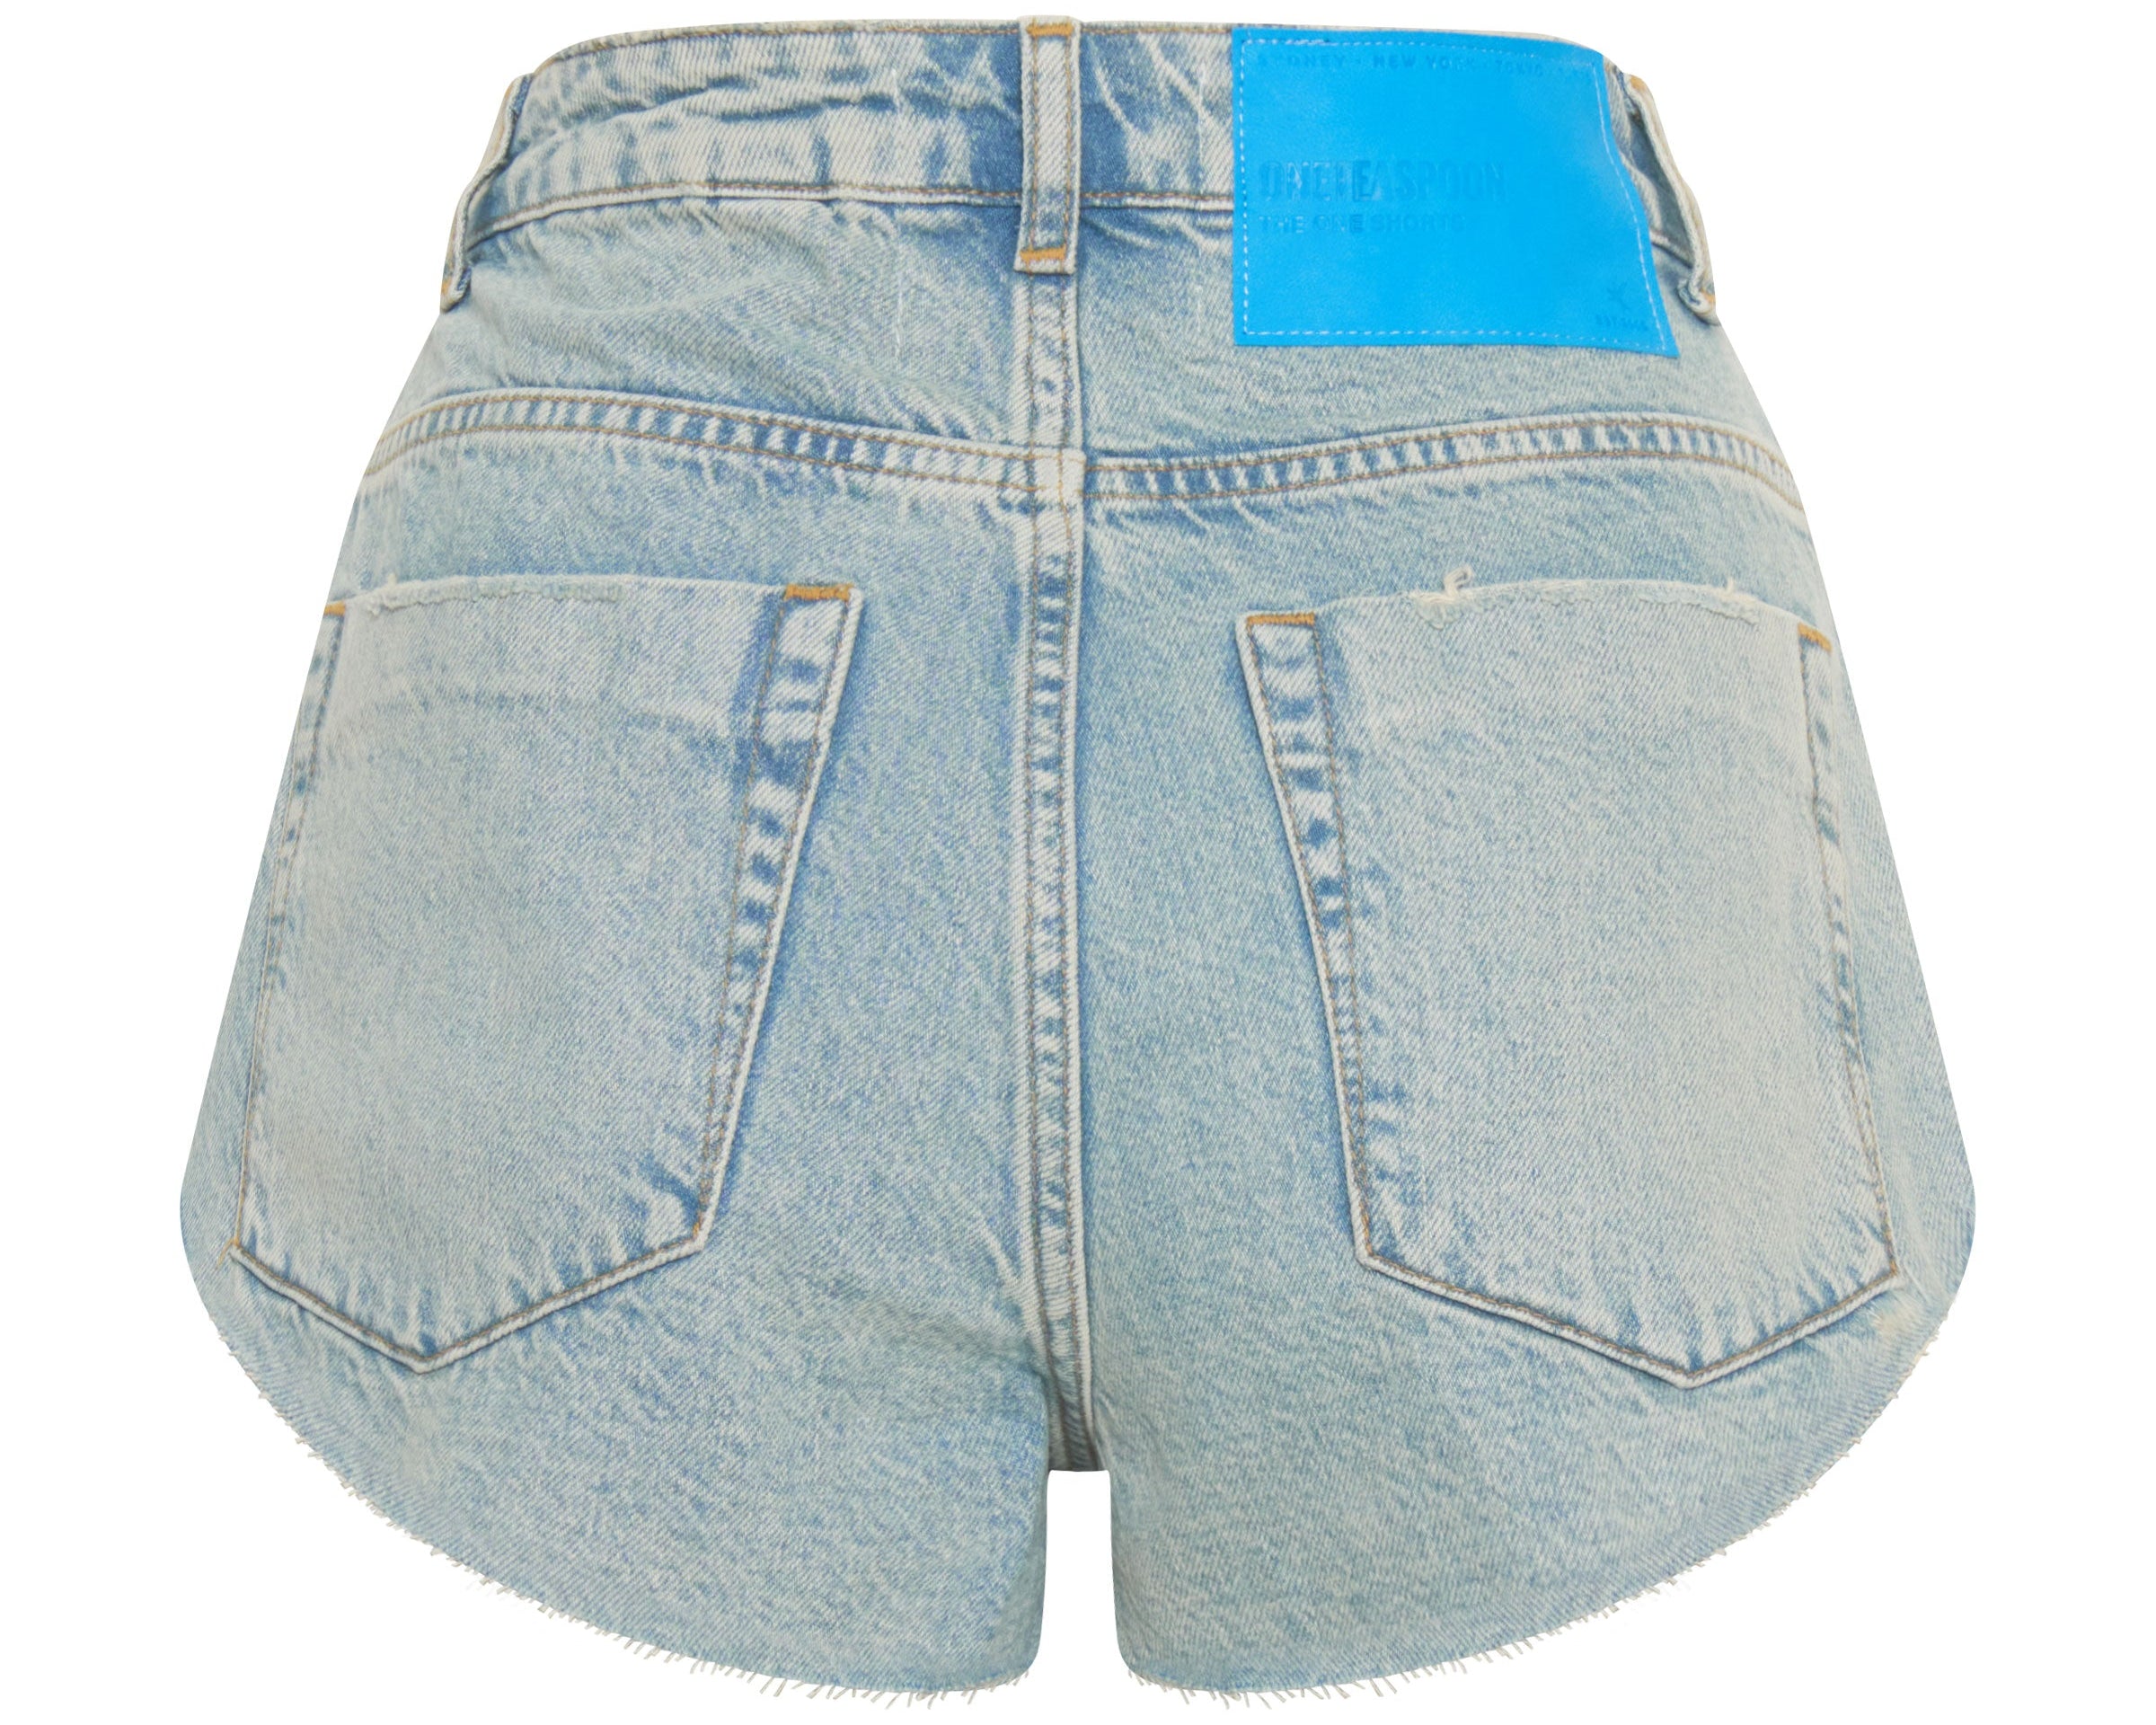 KANSAS ACID THE ONE FITTED CHEEKY DENIM SHORTS